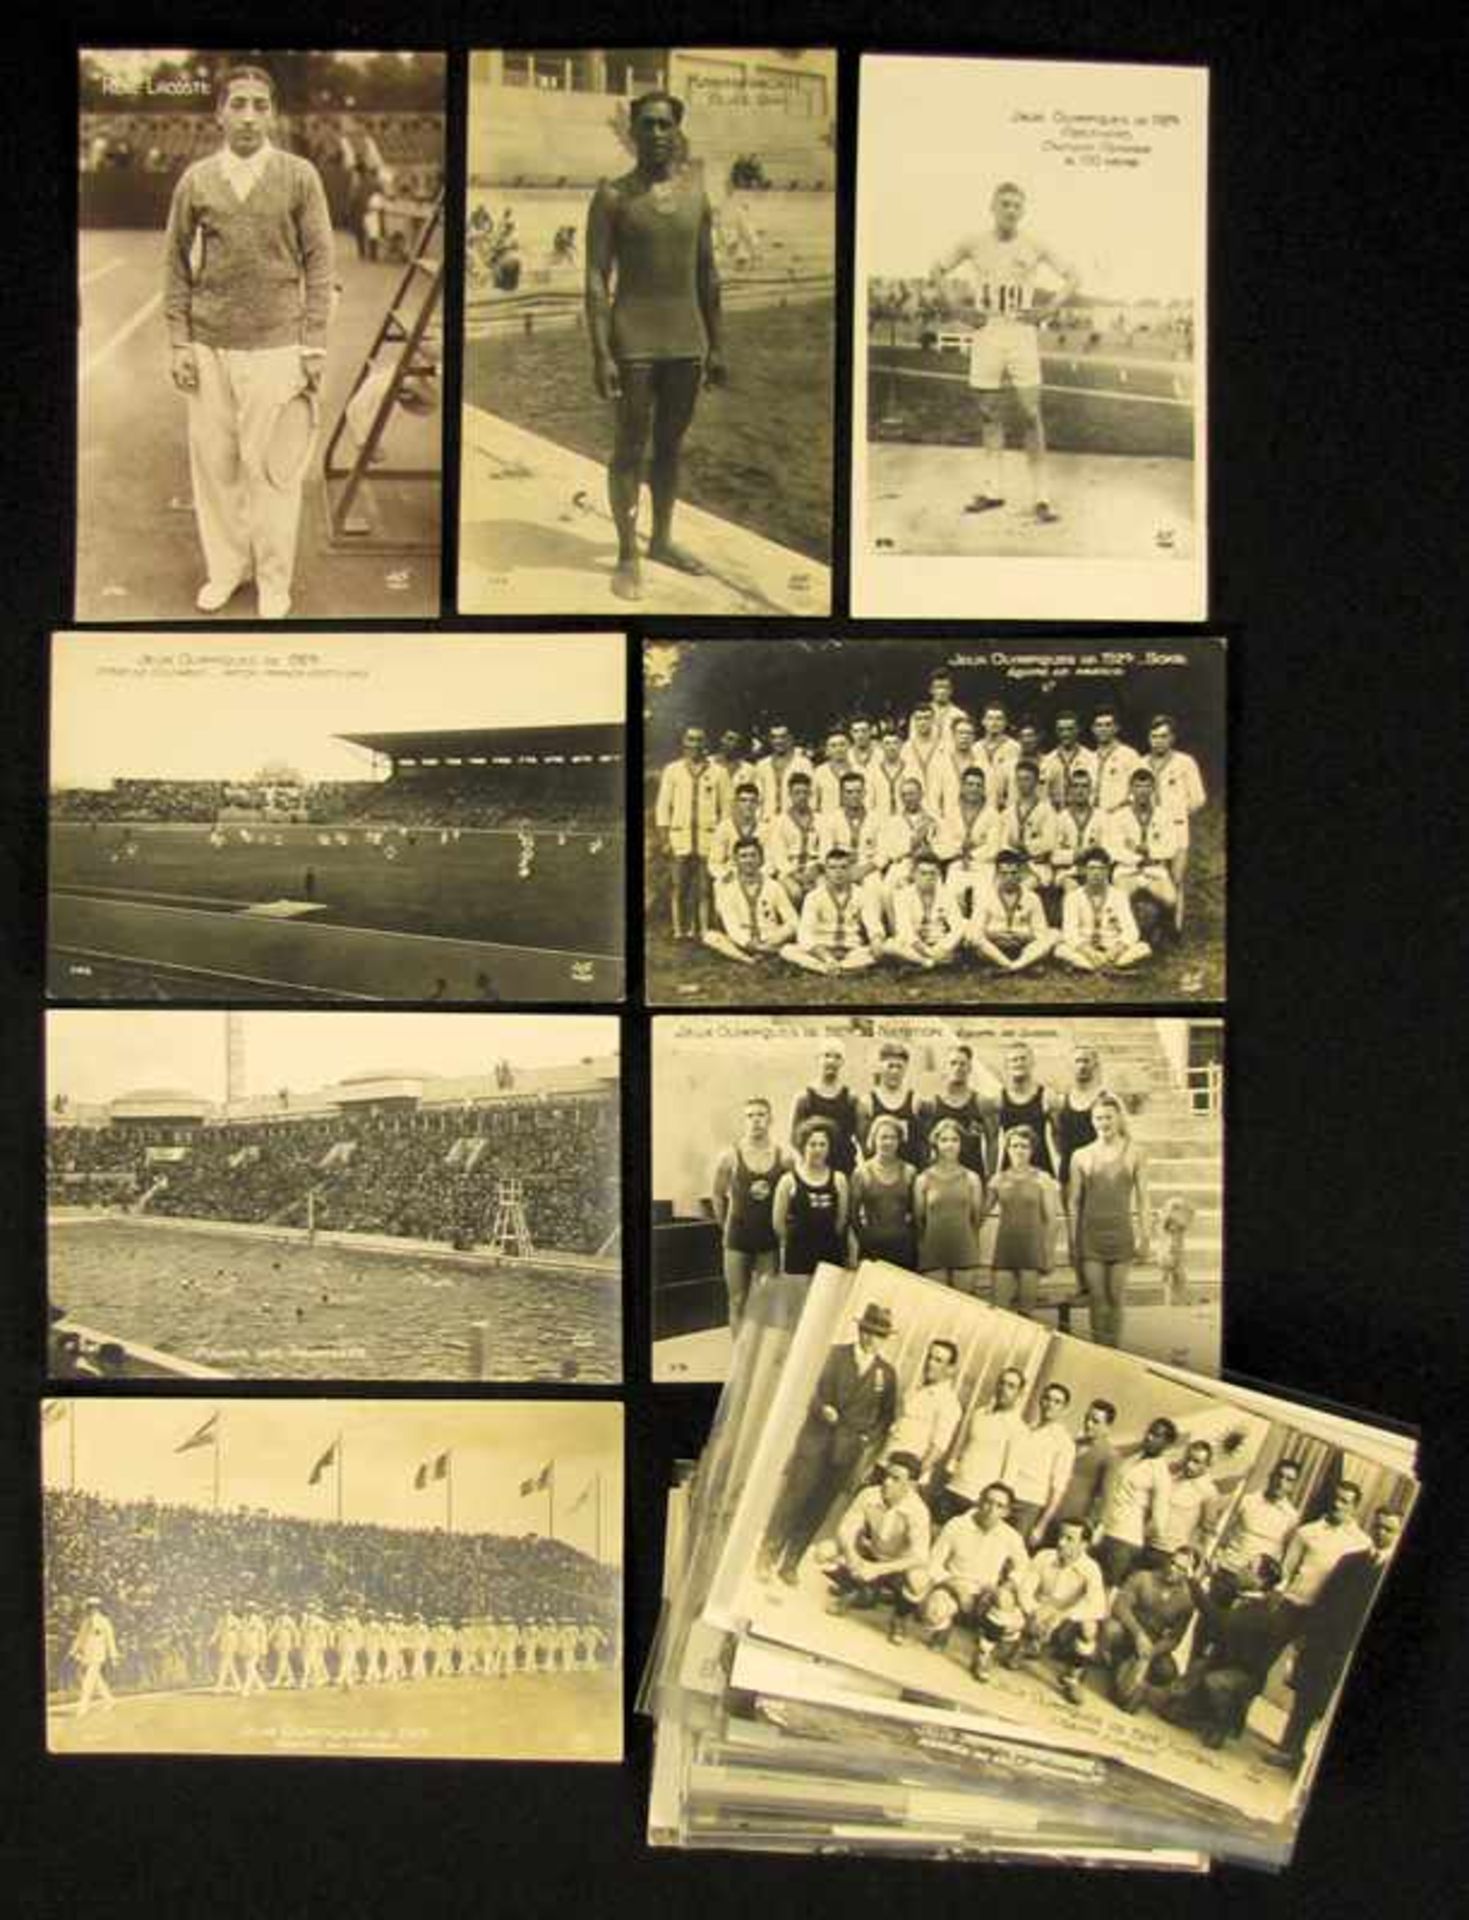 Olympic Games 1924. 72 official Postcards - 72 black-and-white postcards from the Olympic Games in